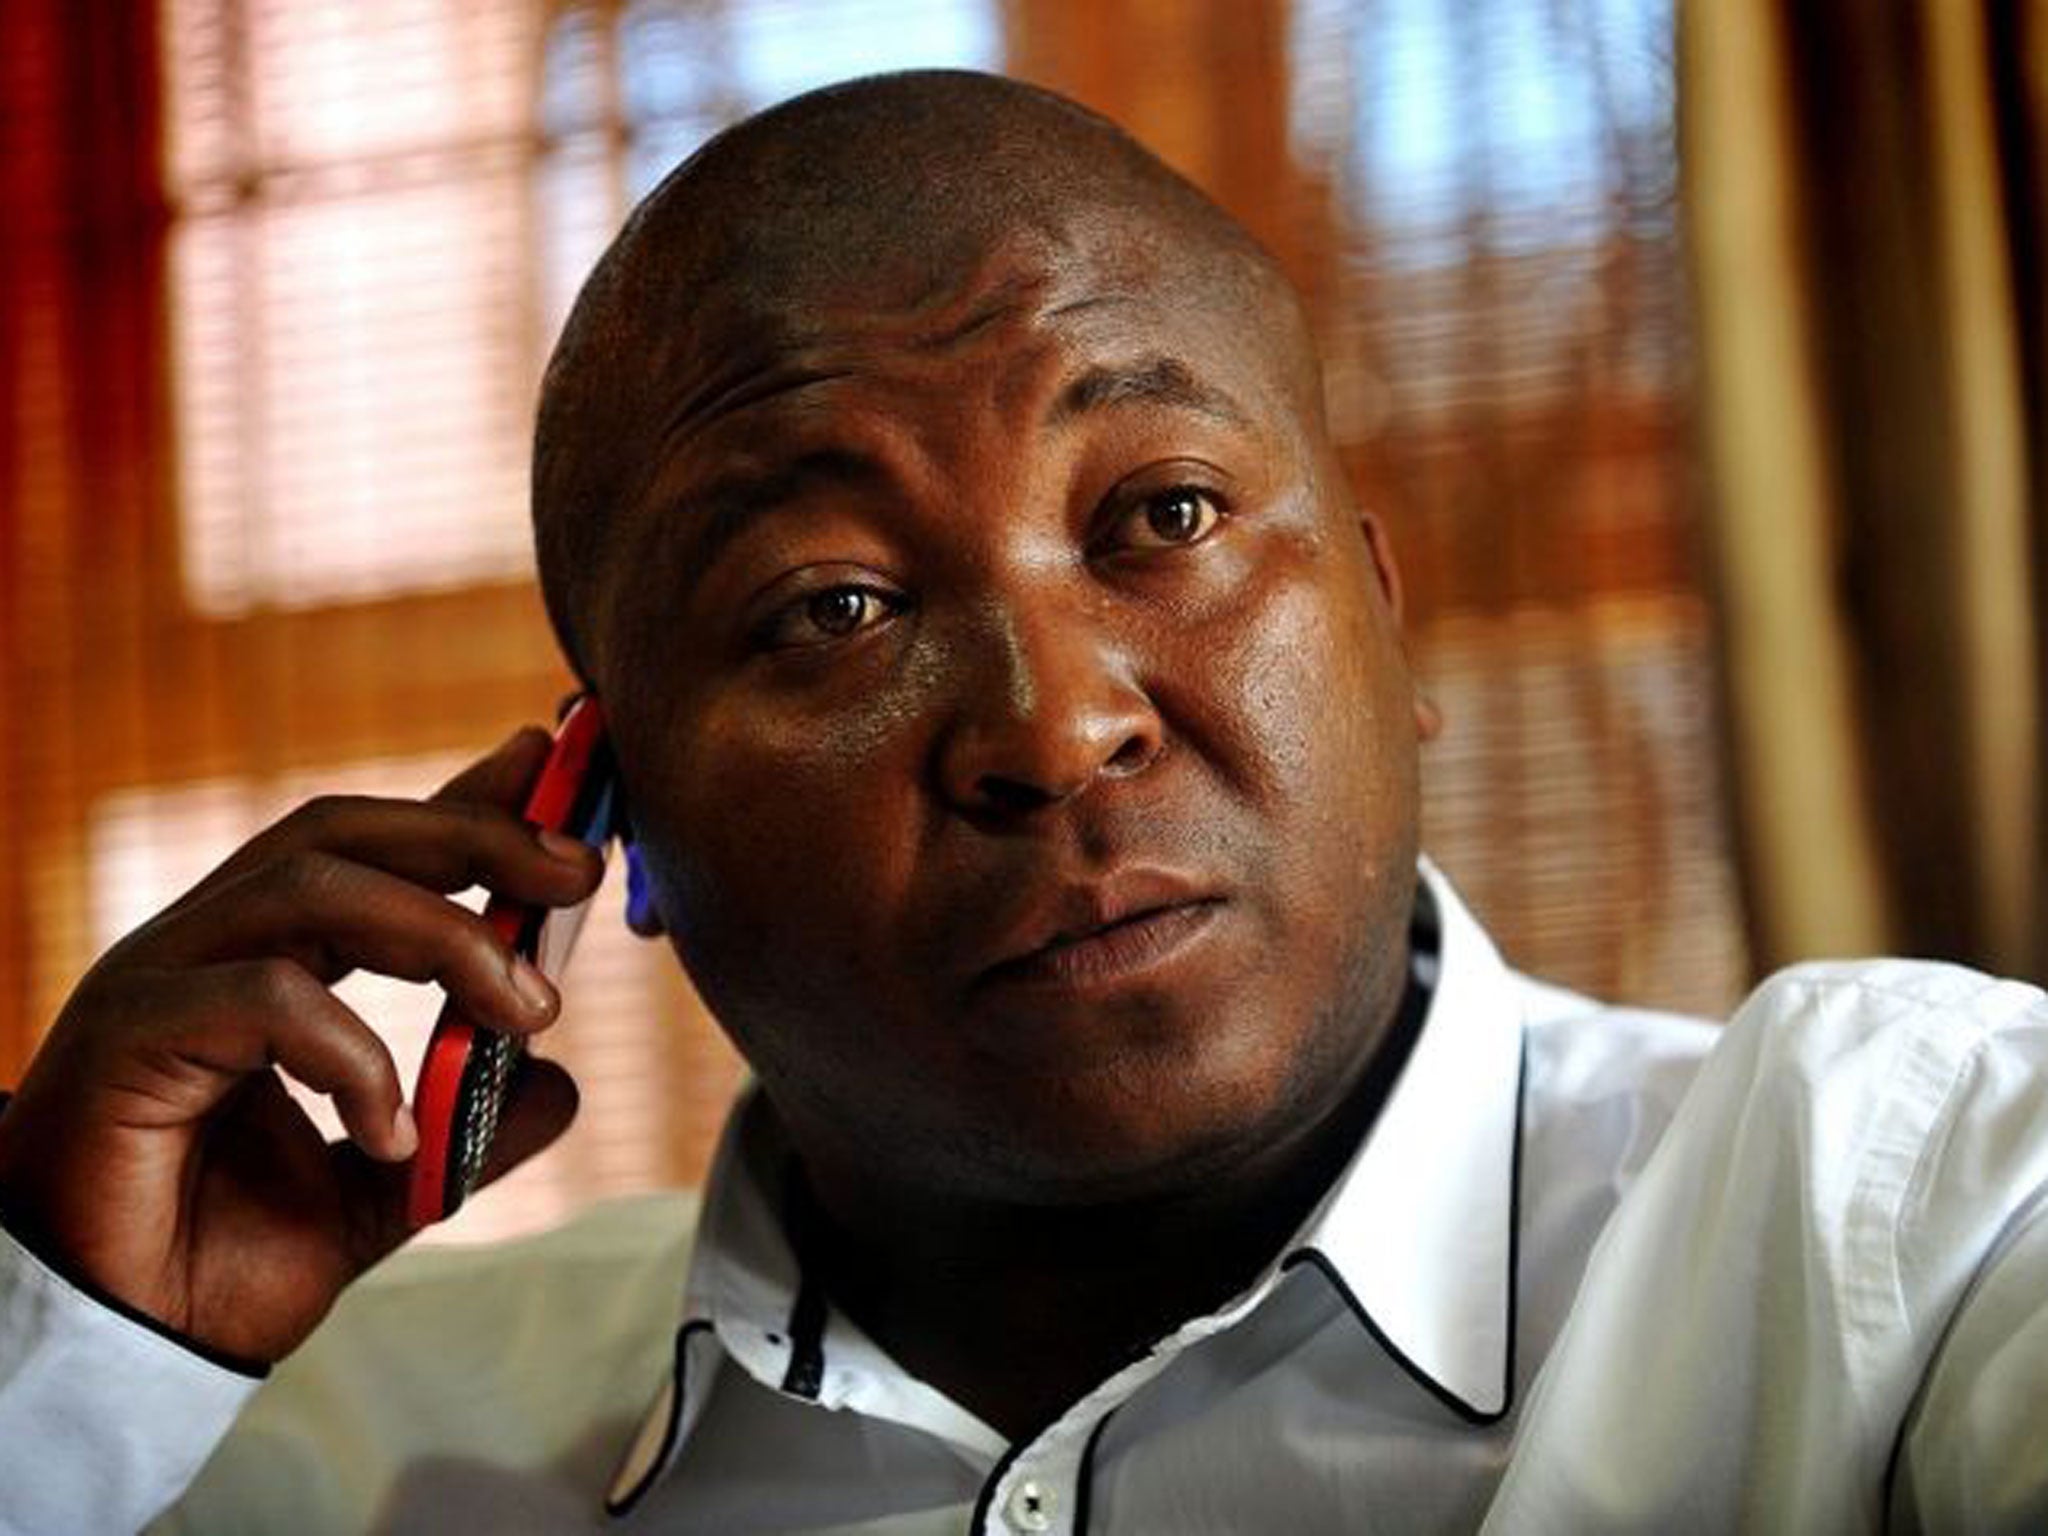 Sign language interpreter Thamsanqa Jantjie speaks on the phone at his home in Bramfischerville, South Africa